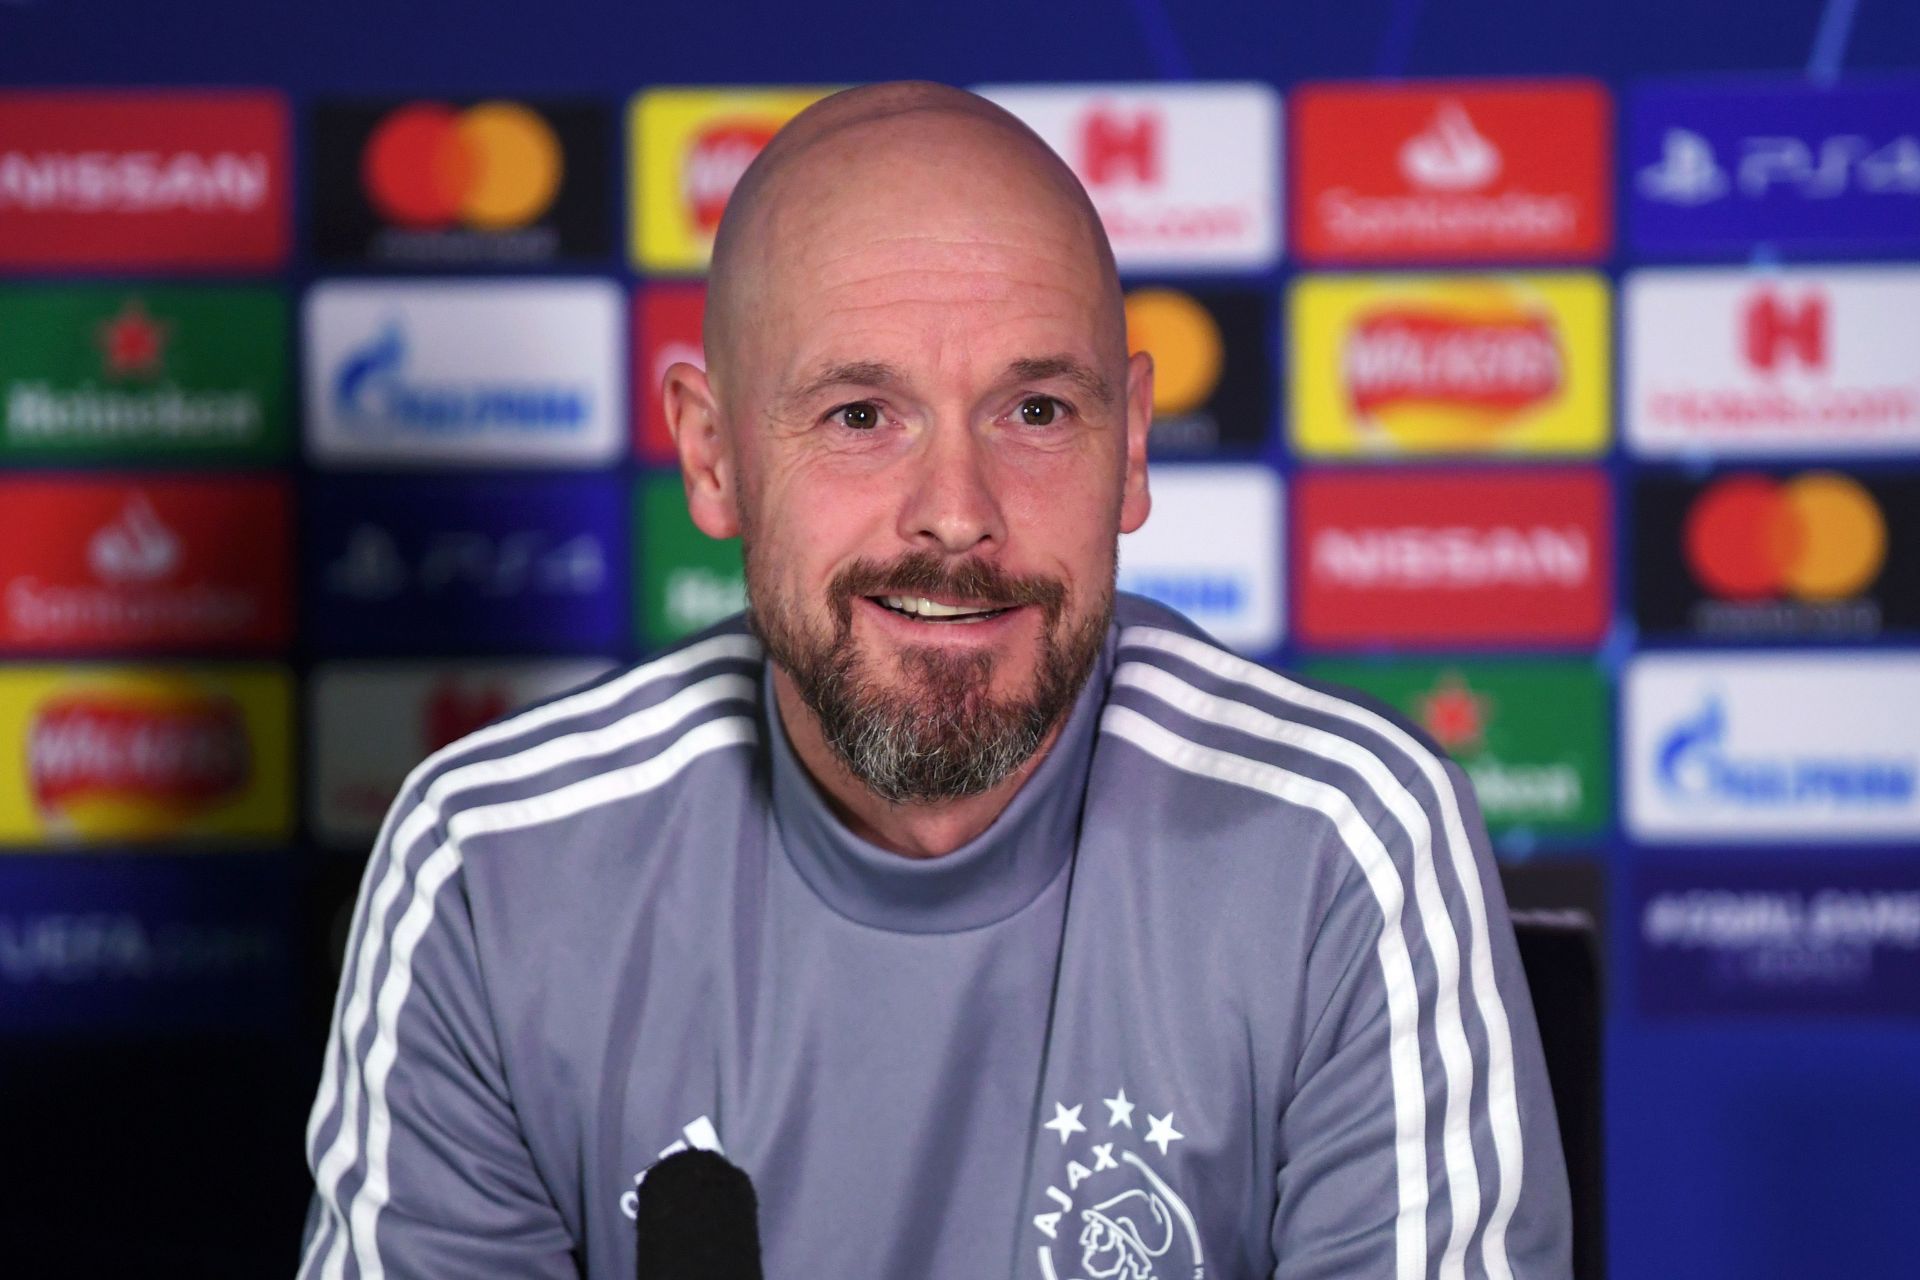 Ten Hag is set to ring the changes at Manchester United